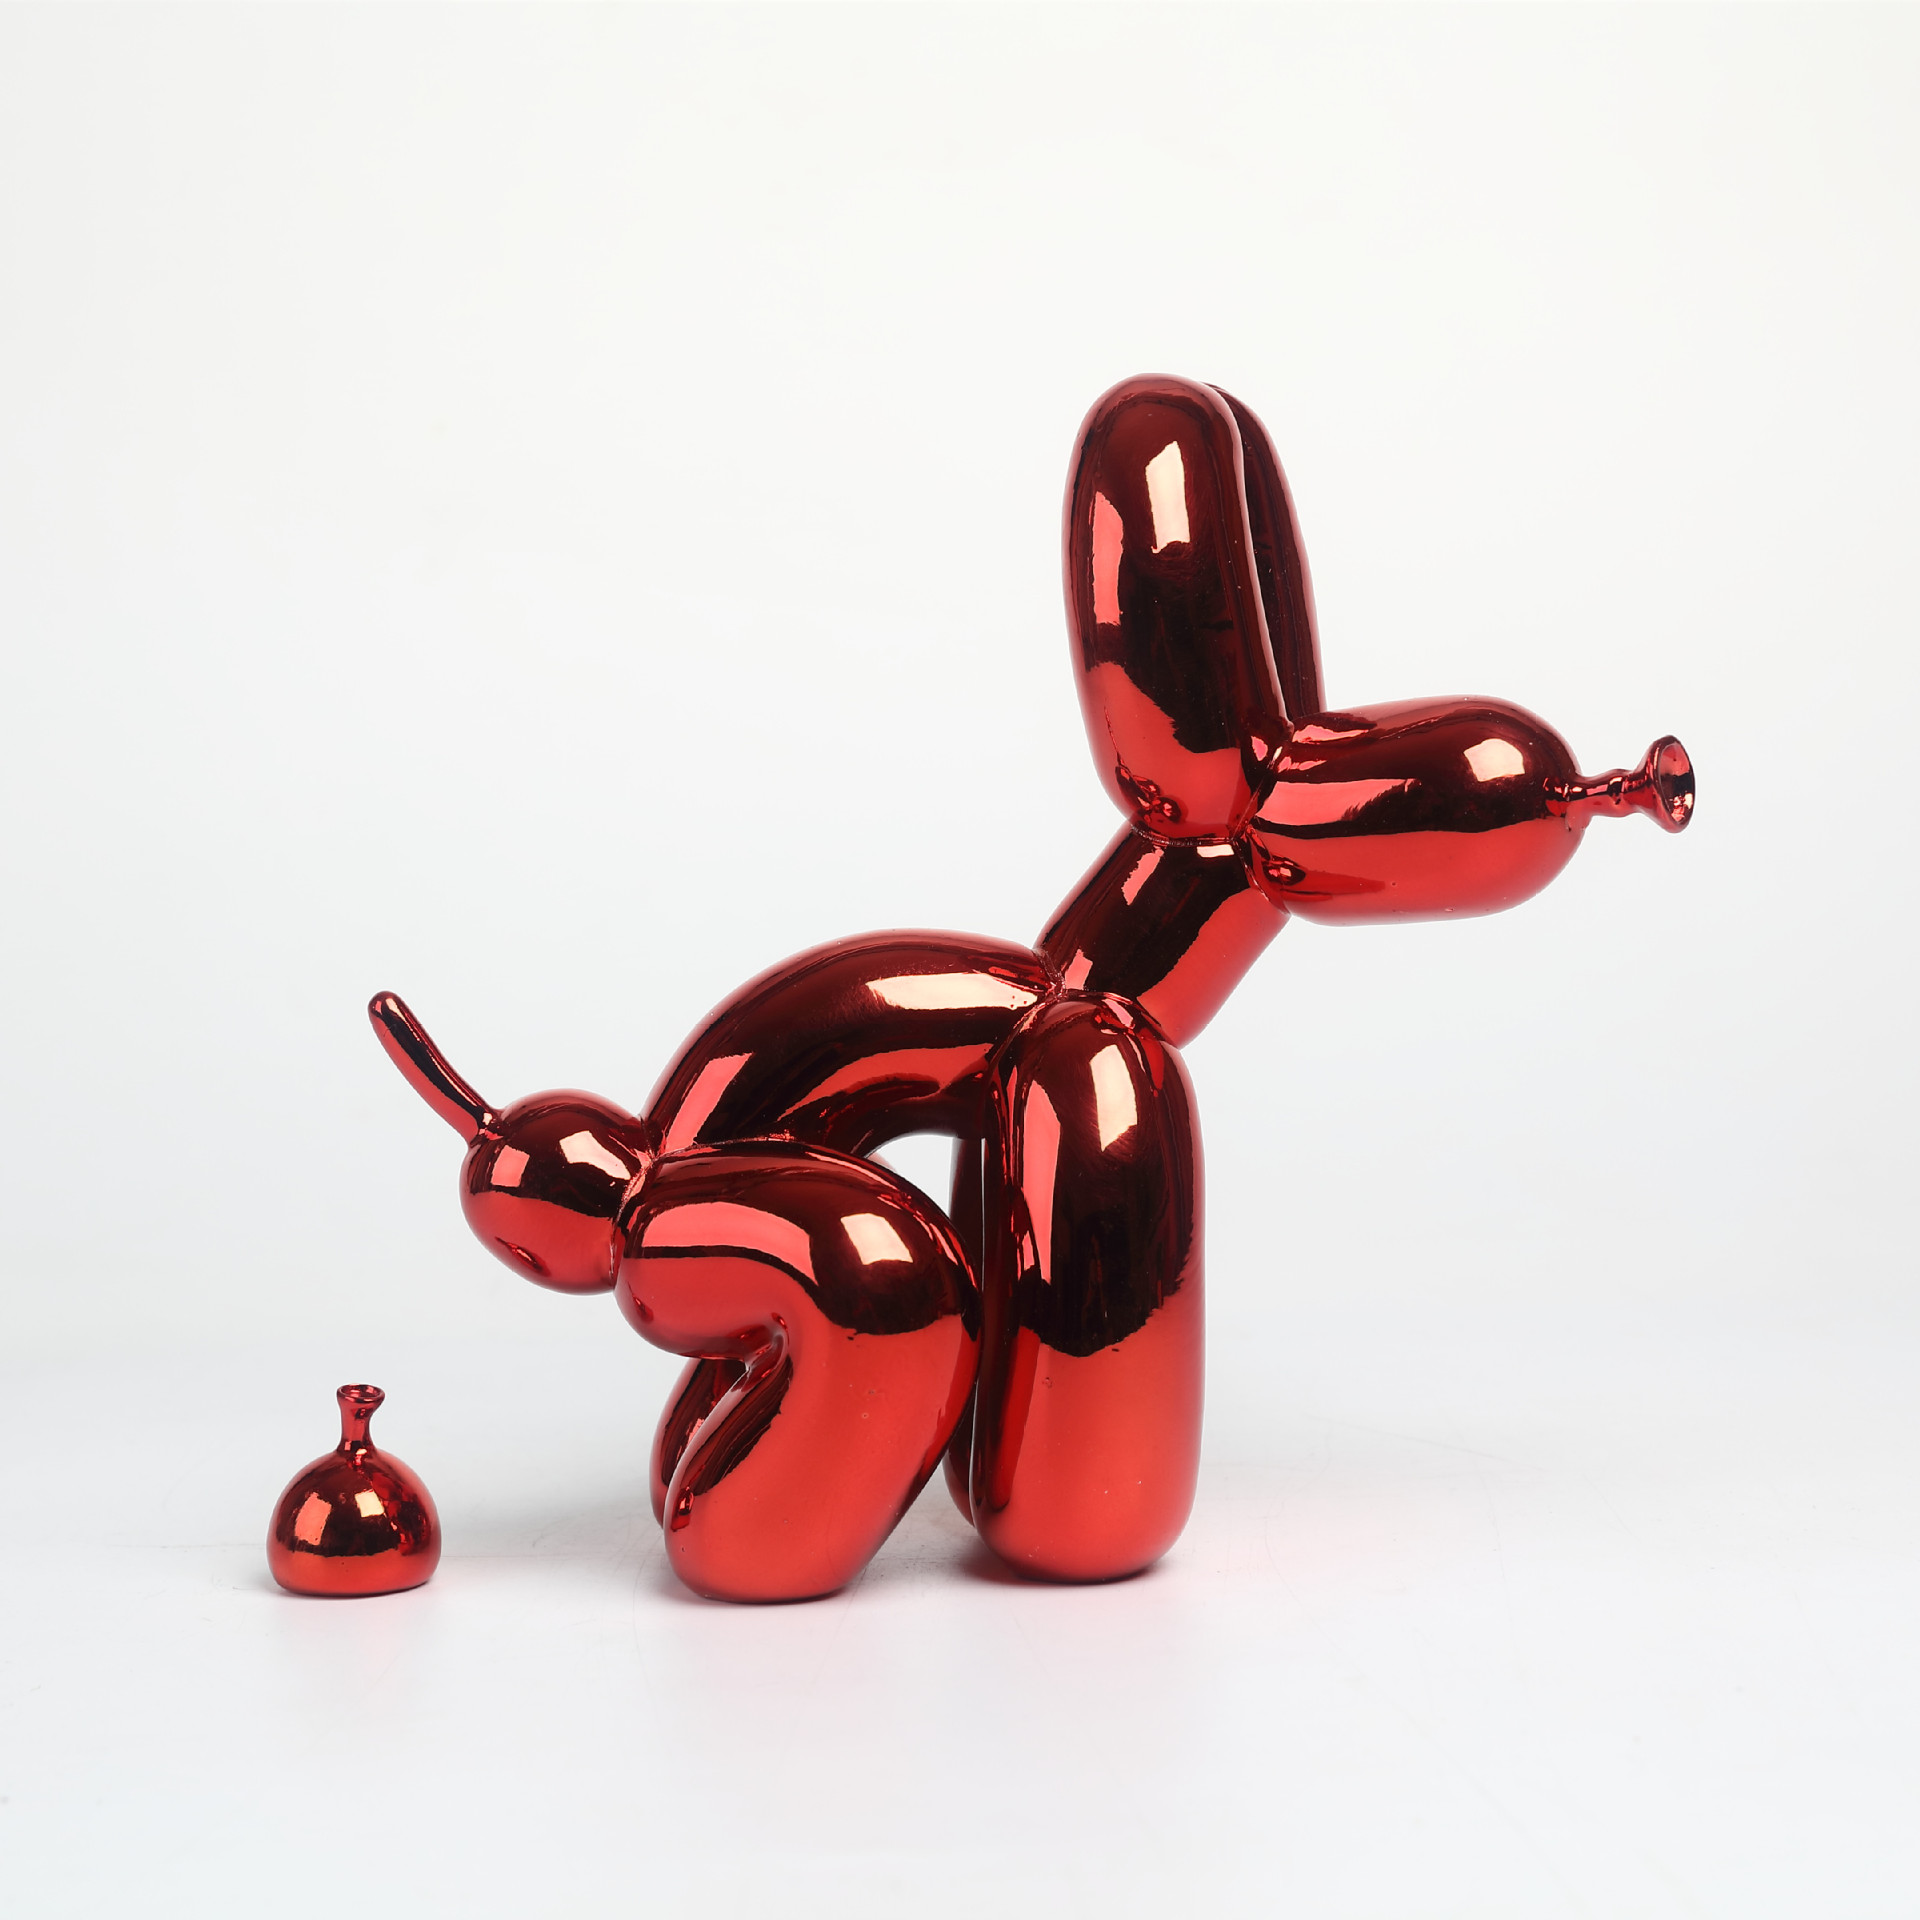 Poop Balloon Dog In Any Color Has Consultation And Cooperation, The Price Is Large, And The AliExpress Explosion Model